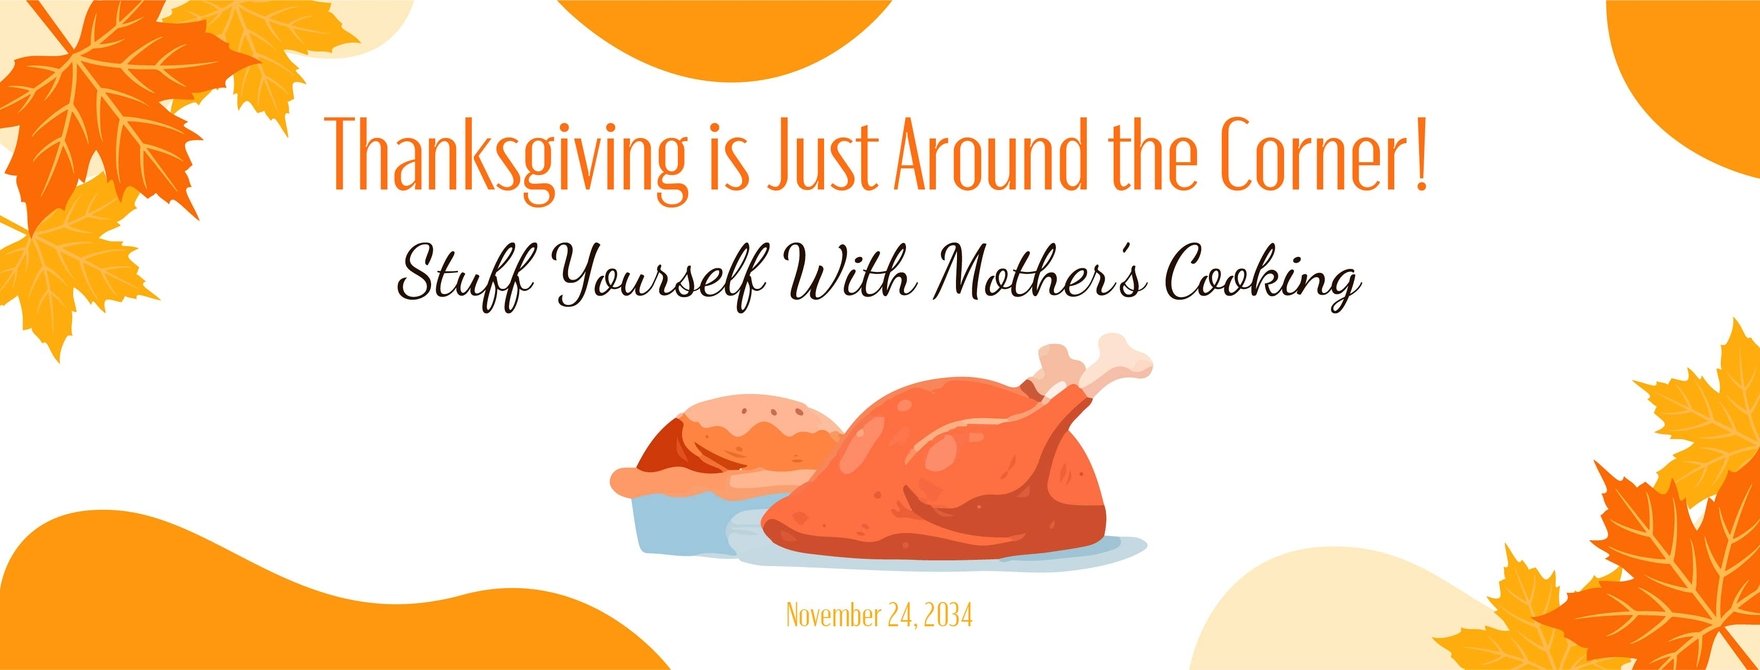 Thanksgiving Day Facebook Cover Banner